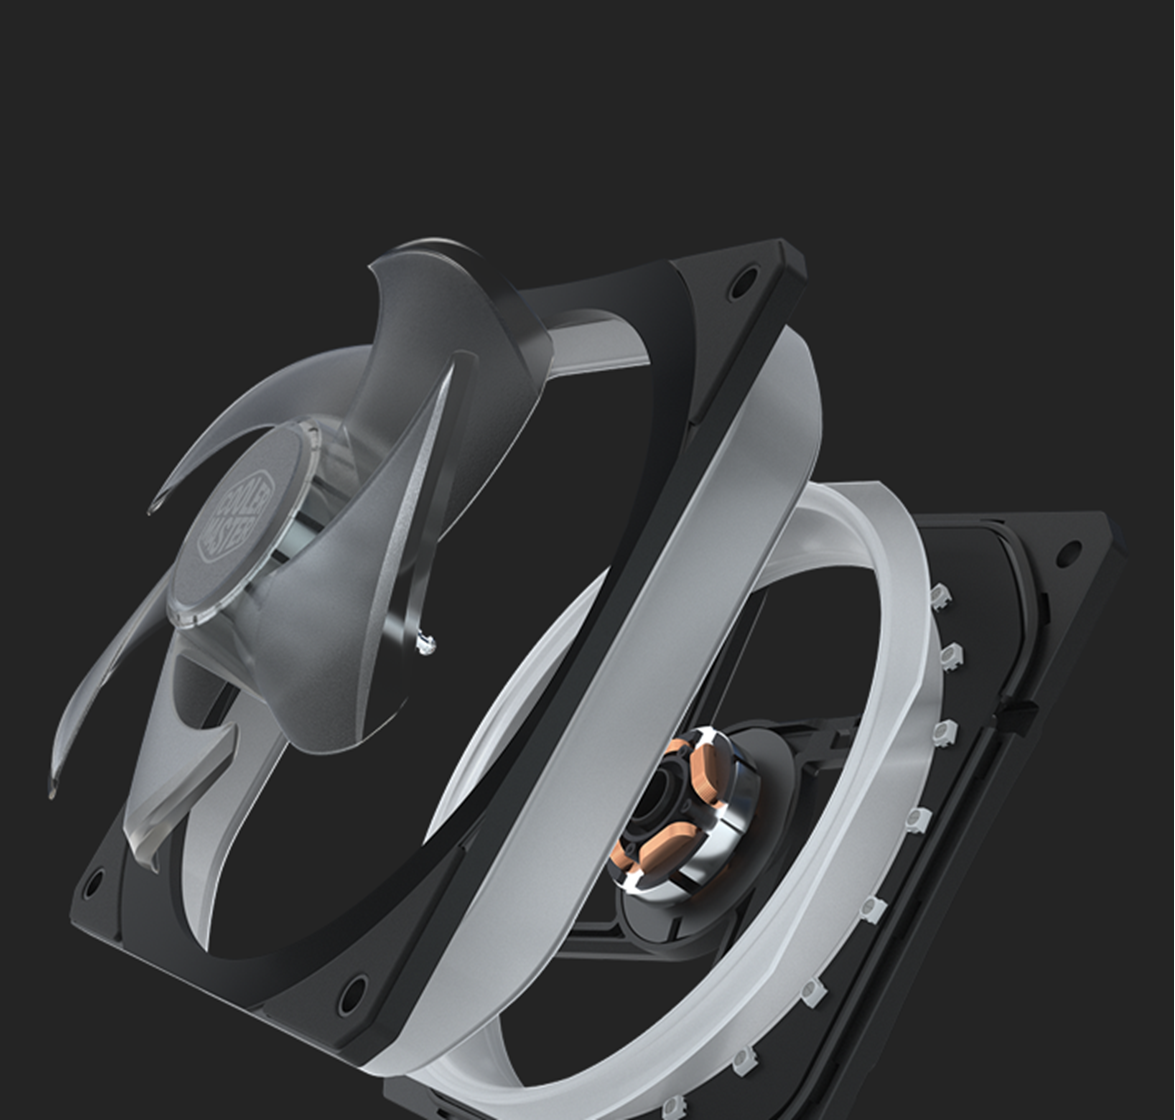 Fan Blade Design Inspired By Helicopters